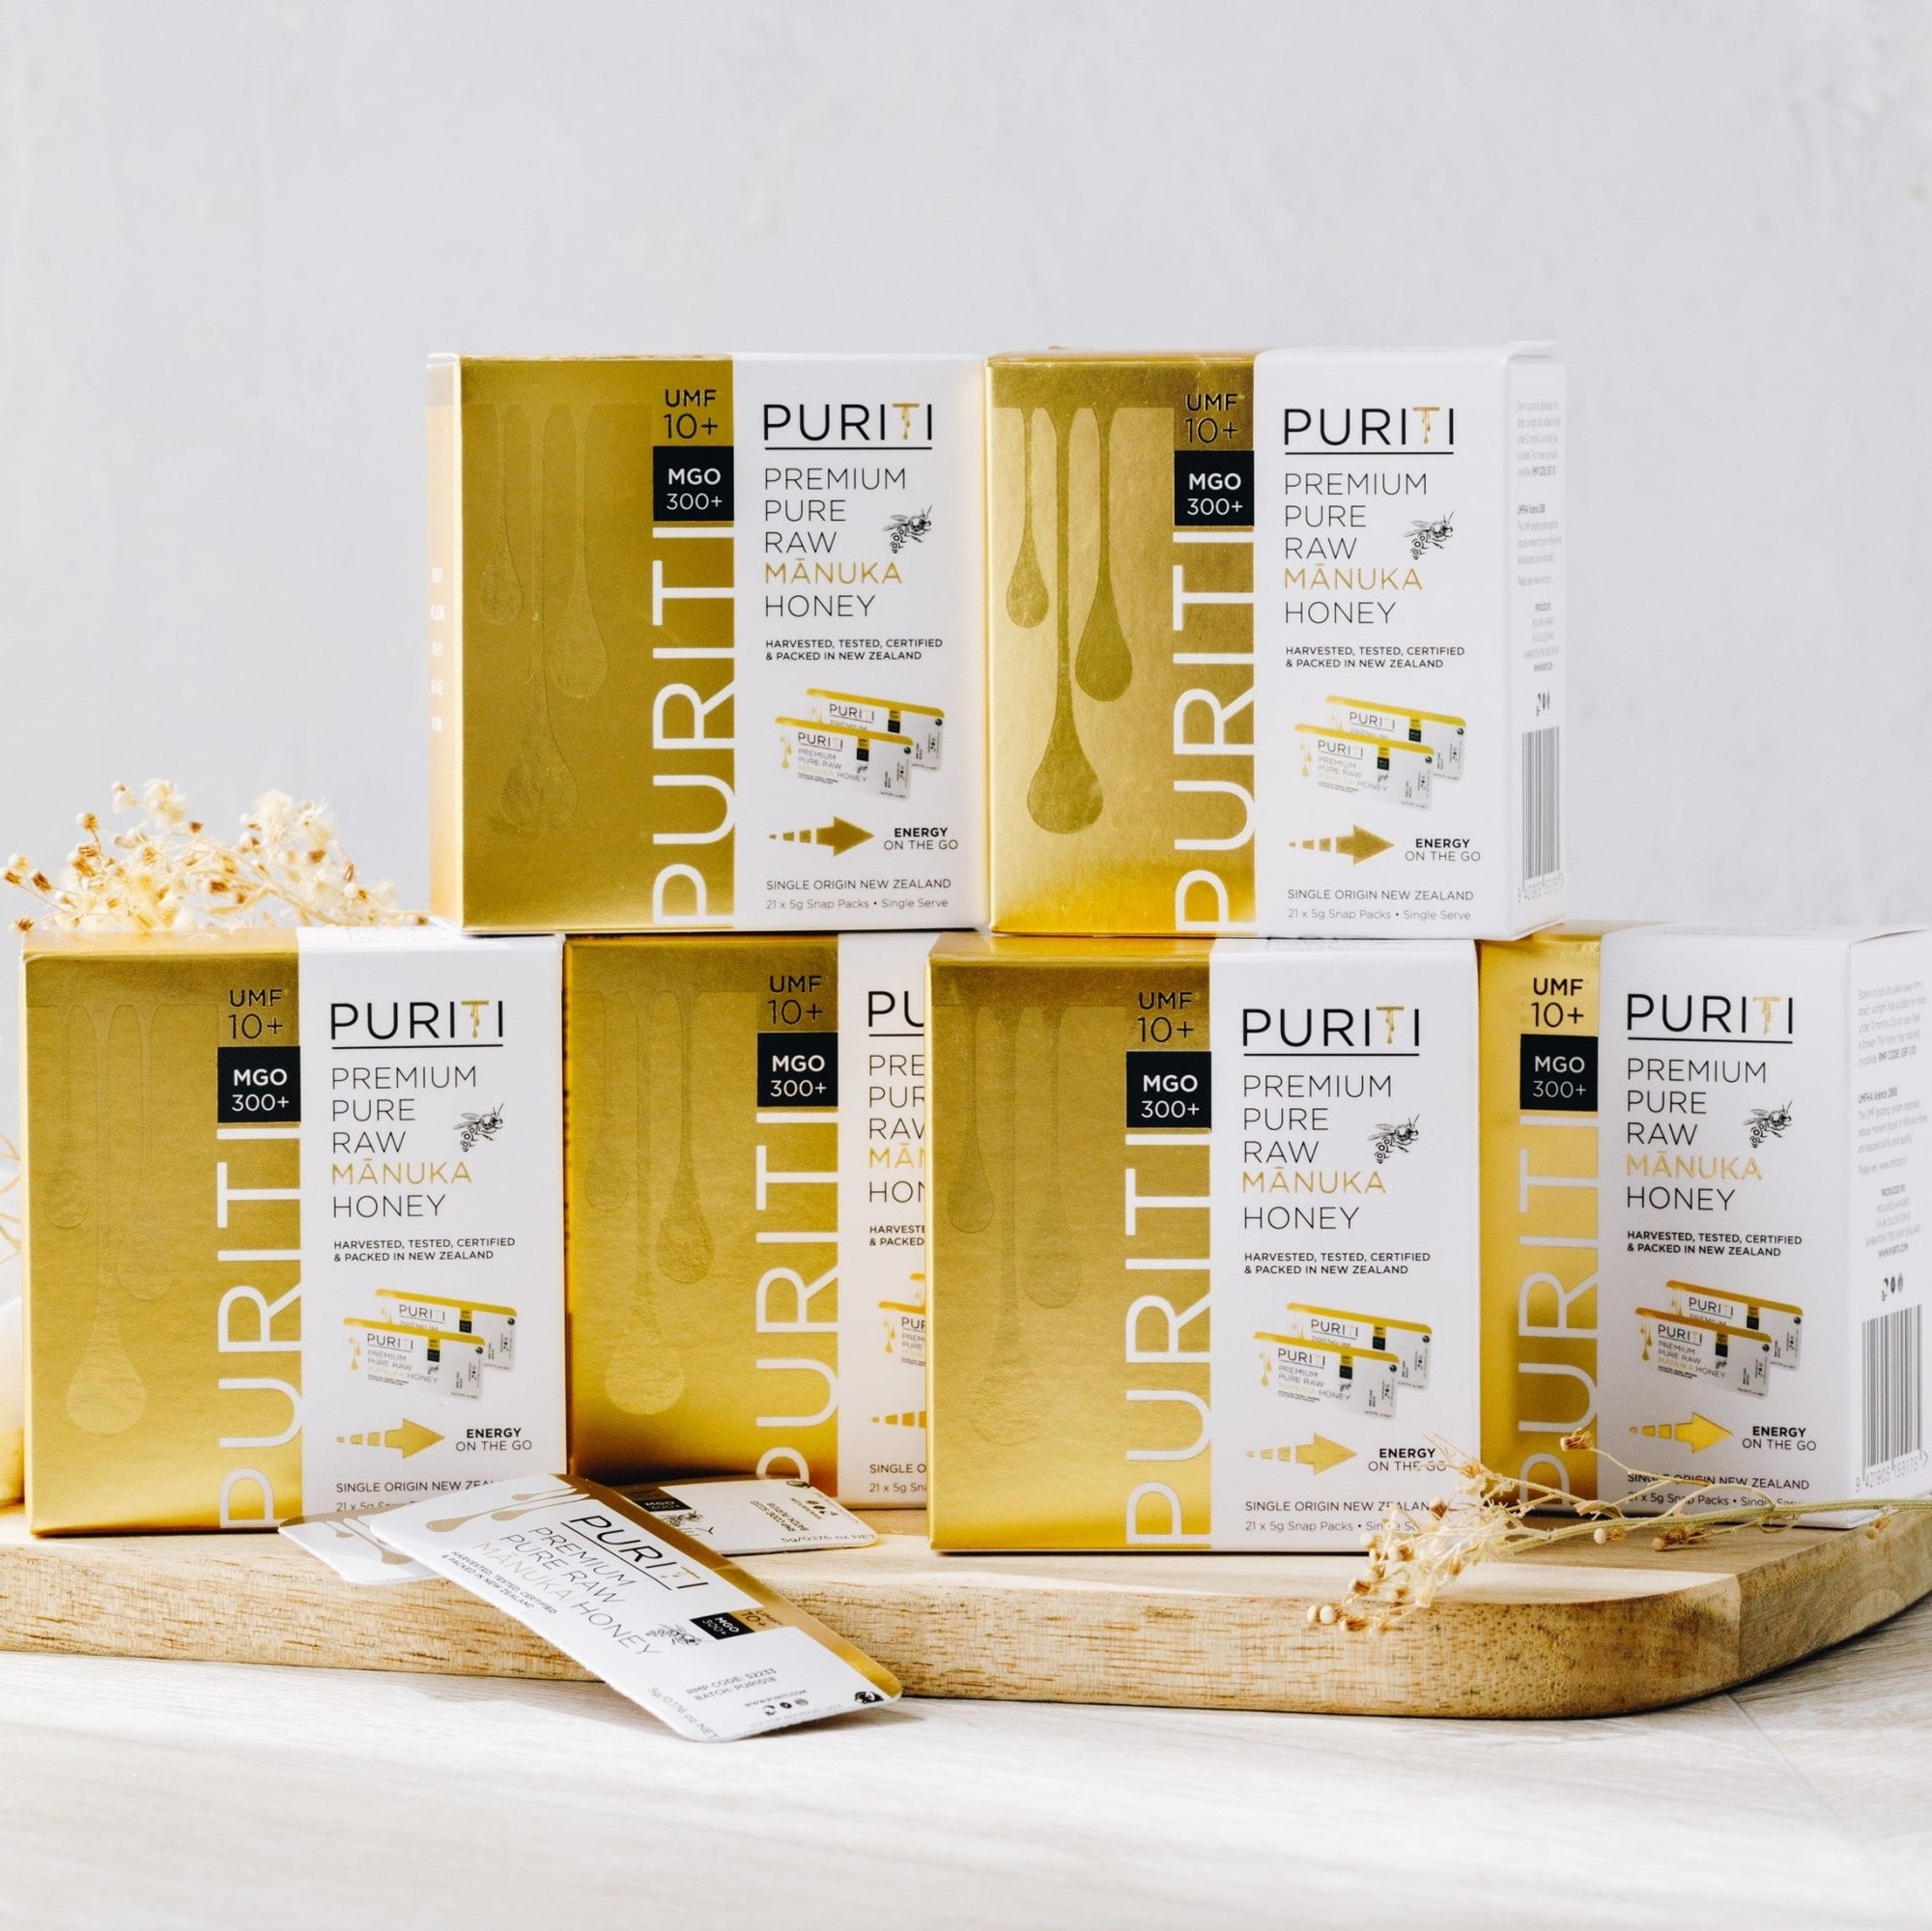 Puriti Premium Pure Raw Manuka Honey UMF 10+ snap packs, 6 boxes each containing 40 snap packs stacked together